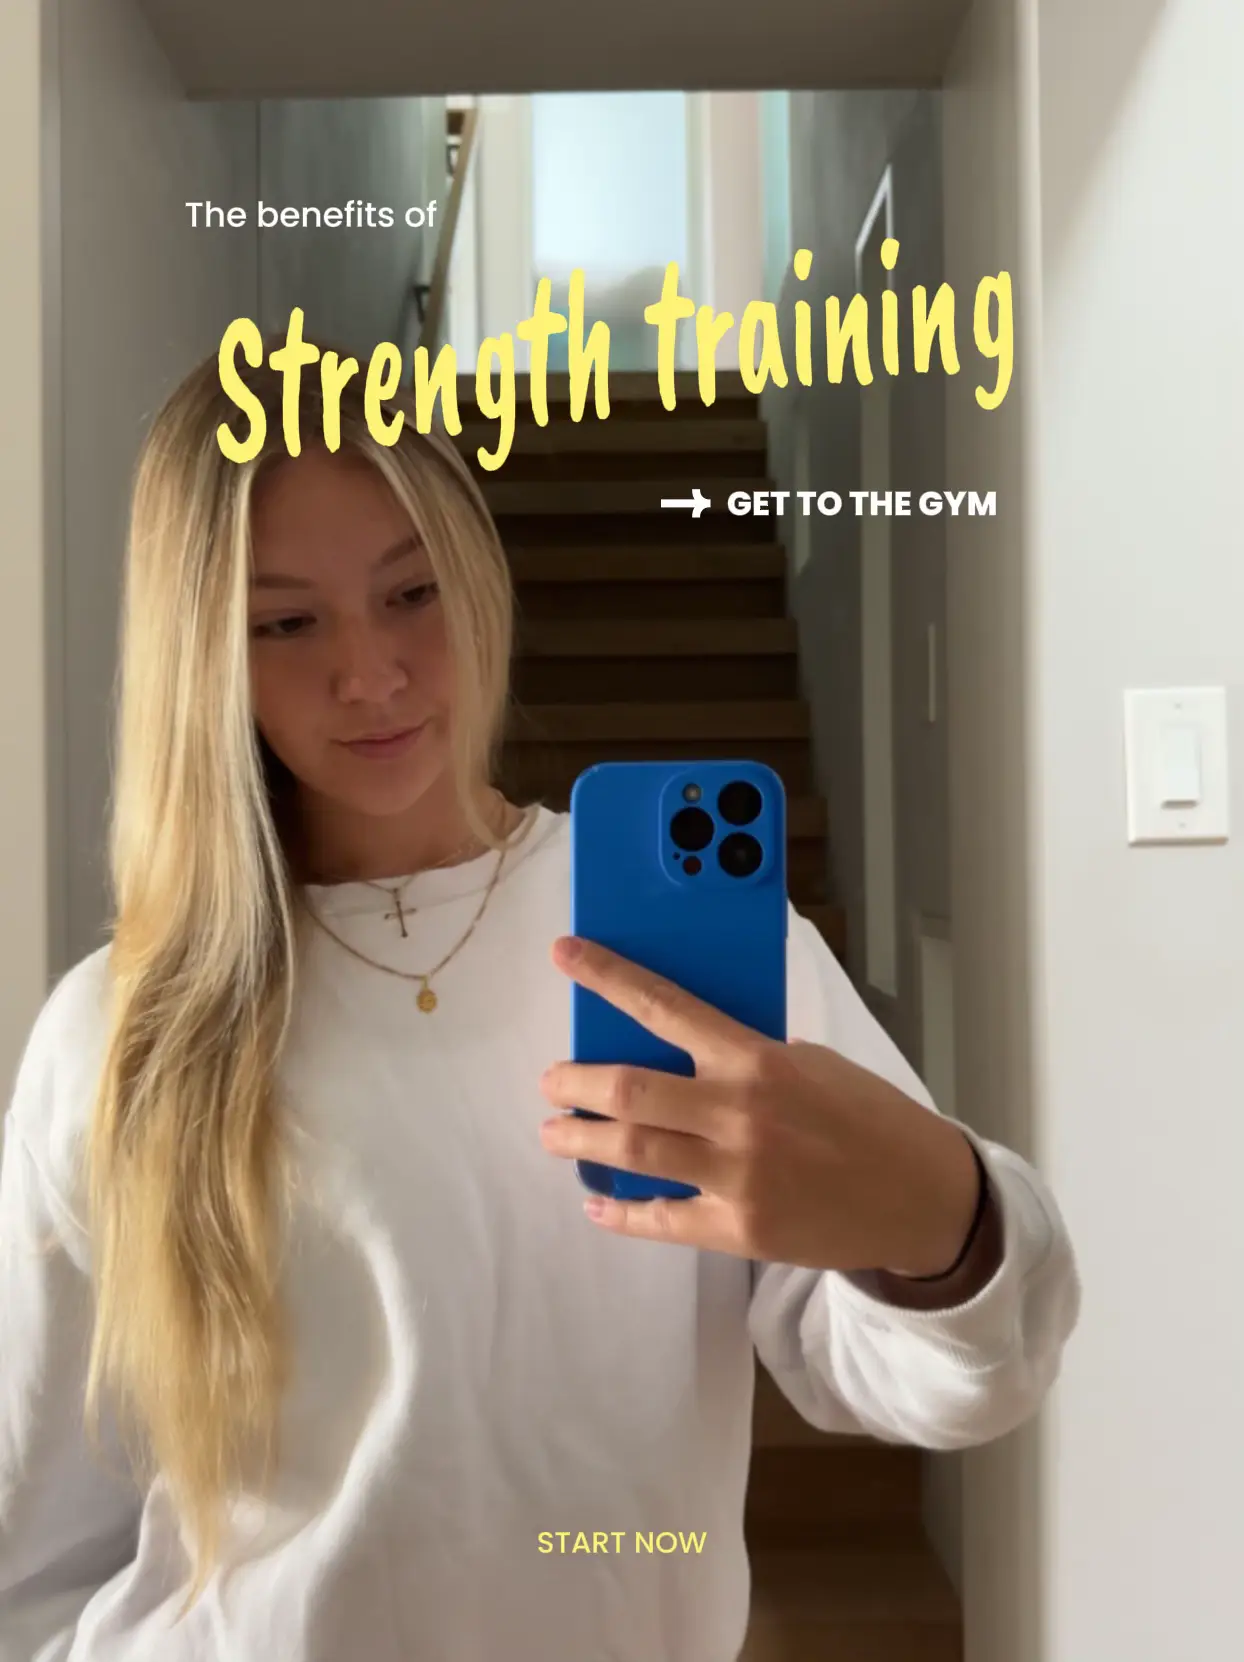 🆚What is the difference between She is in training and She is under  training ? She is in training vs She is under training ?